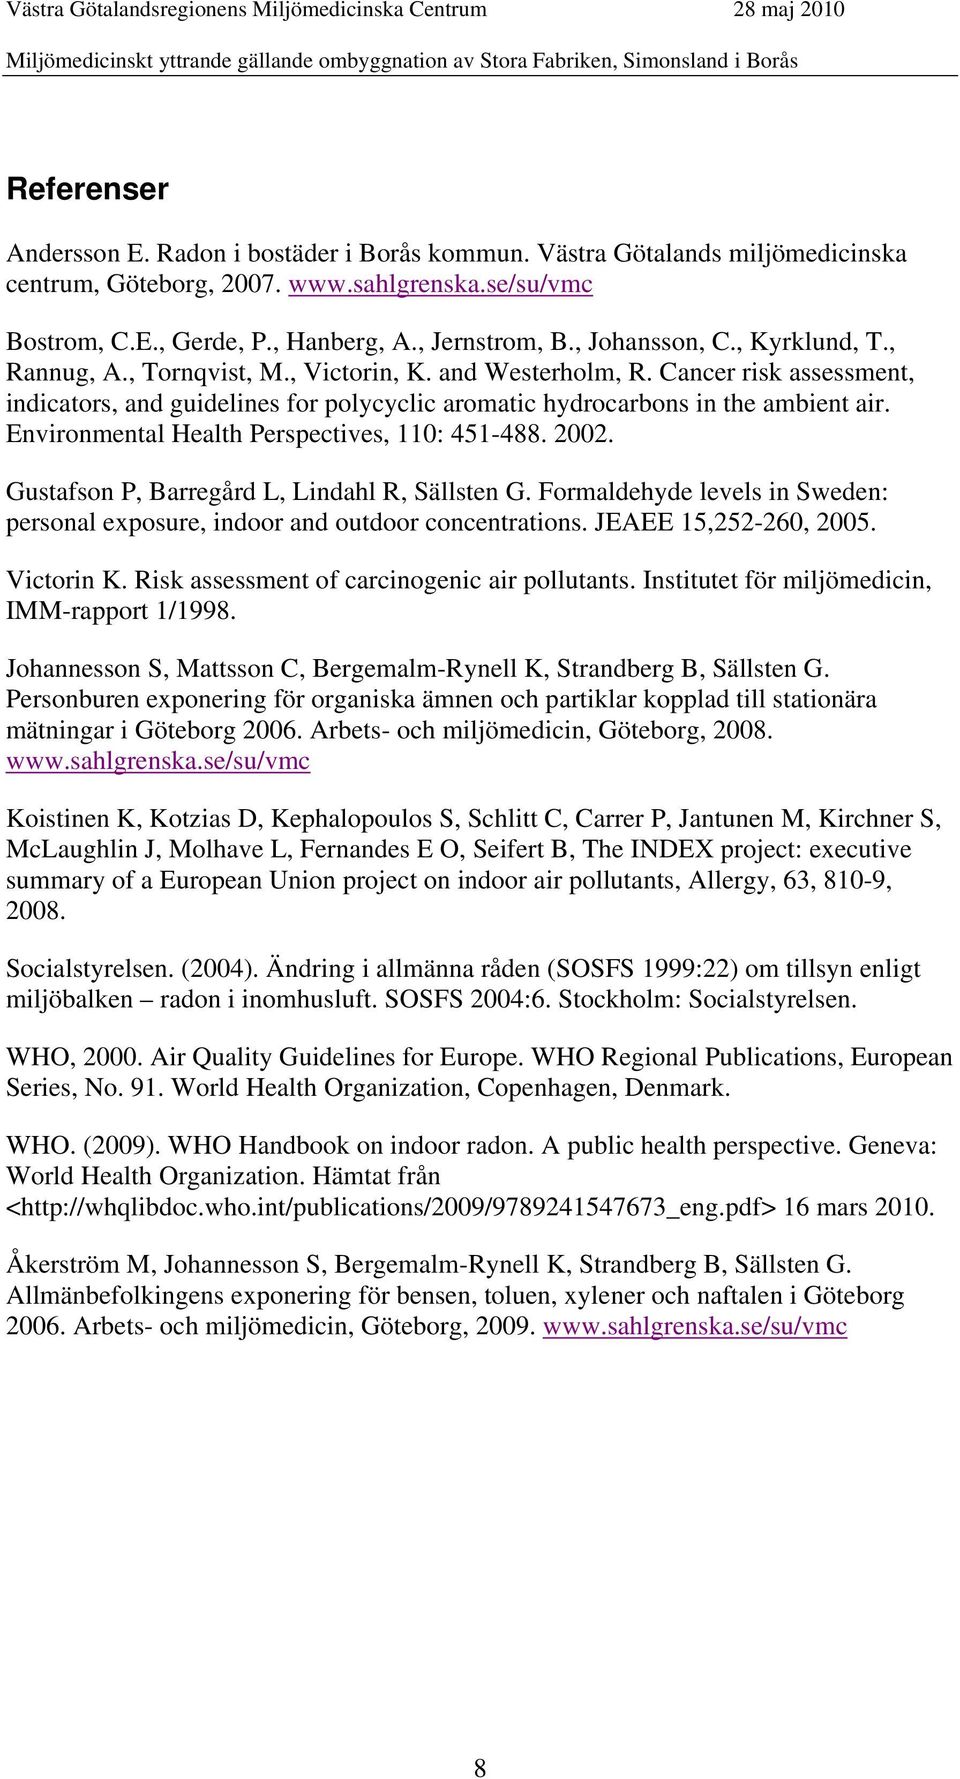 Environmental Health Perspectives, 110: 451-488. 2002. Gustafson P, Barregård L, Lindahl R, Sällsten G. Formaldehyde levels in Sweden: personal exposure, indoor and outdoor concentrations.